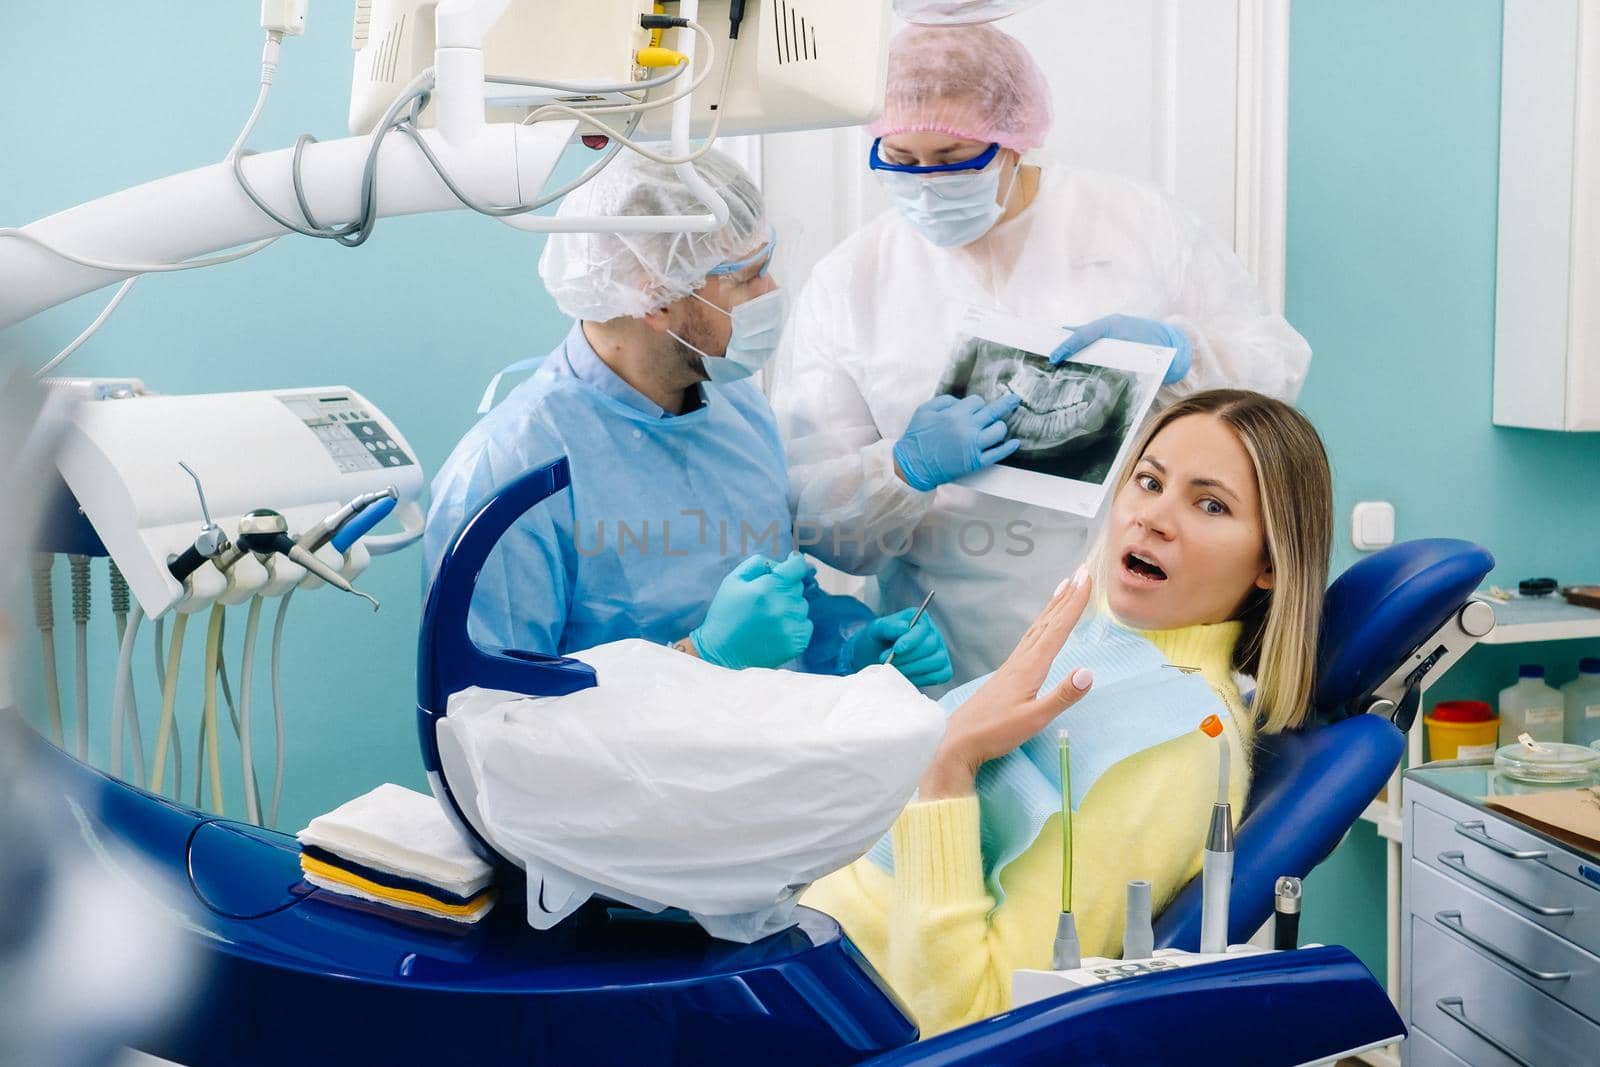 The dentist explains the details of the X-ray to his colleague, the patient is surprised by what is happening.